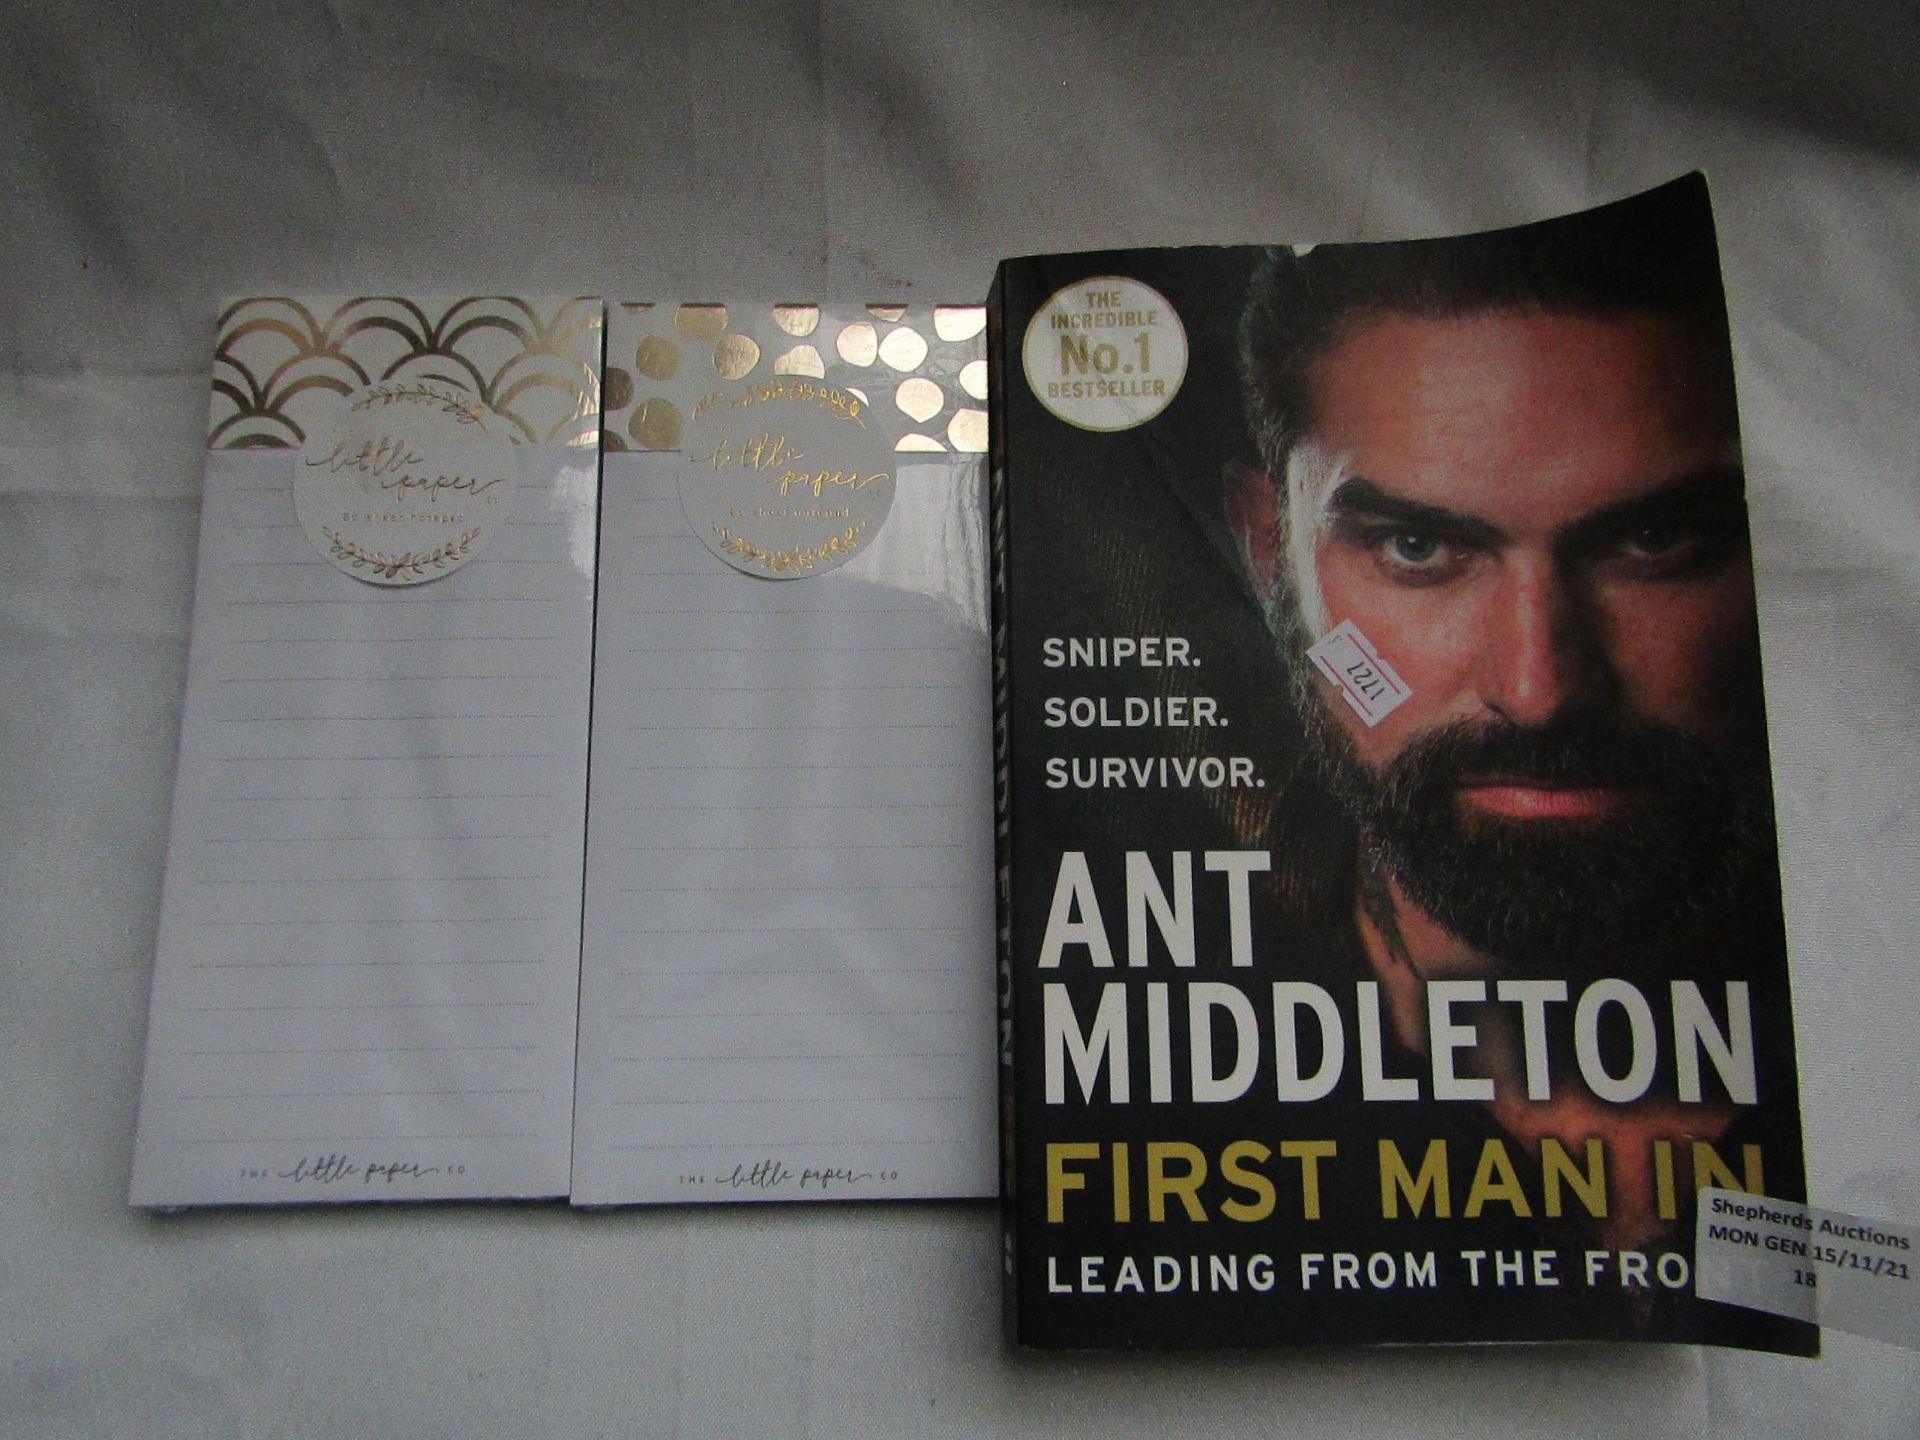 1x Ant Middleton - First Man In Book - Good Condition. 2x The Little Paper - 80 Sheet Note Pad